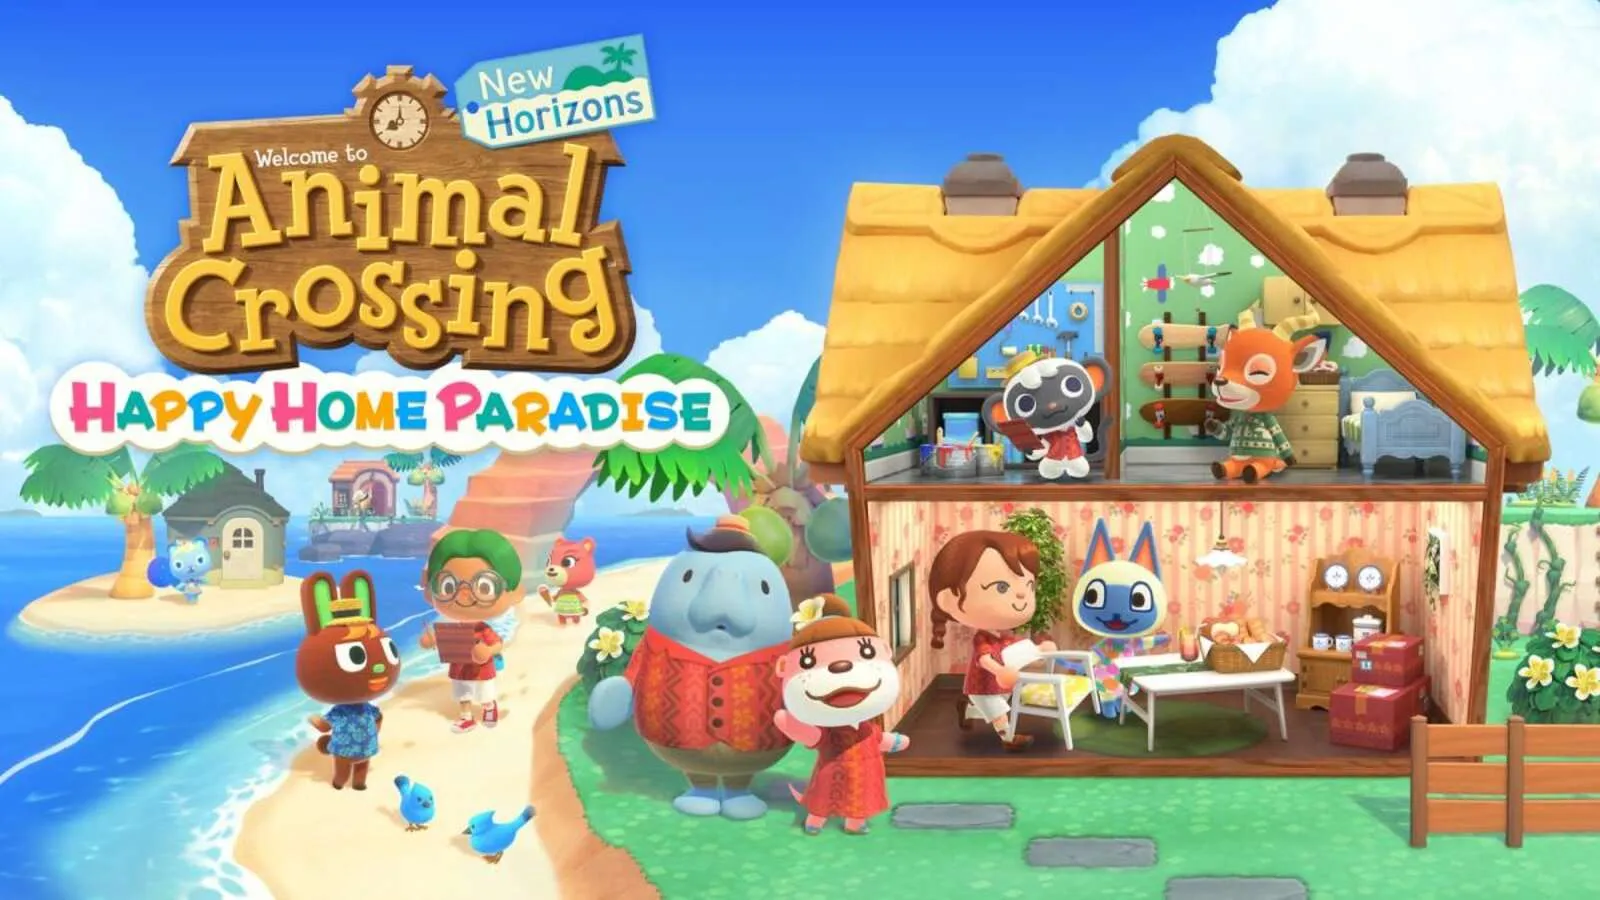 Animal Crossing: New Horizons Happy Home Paradise and the 2.0 update